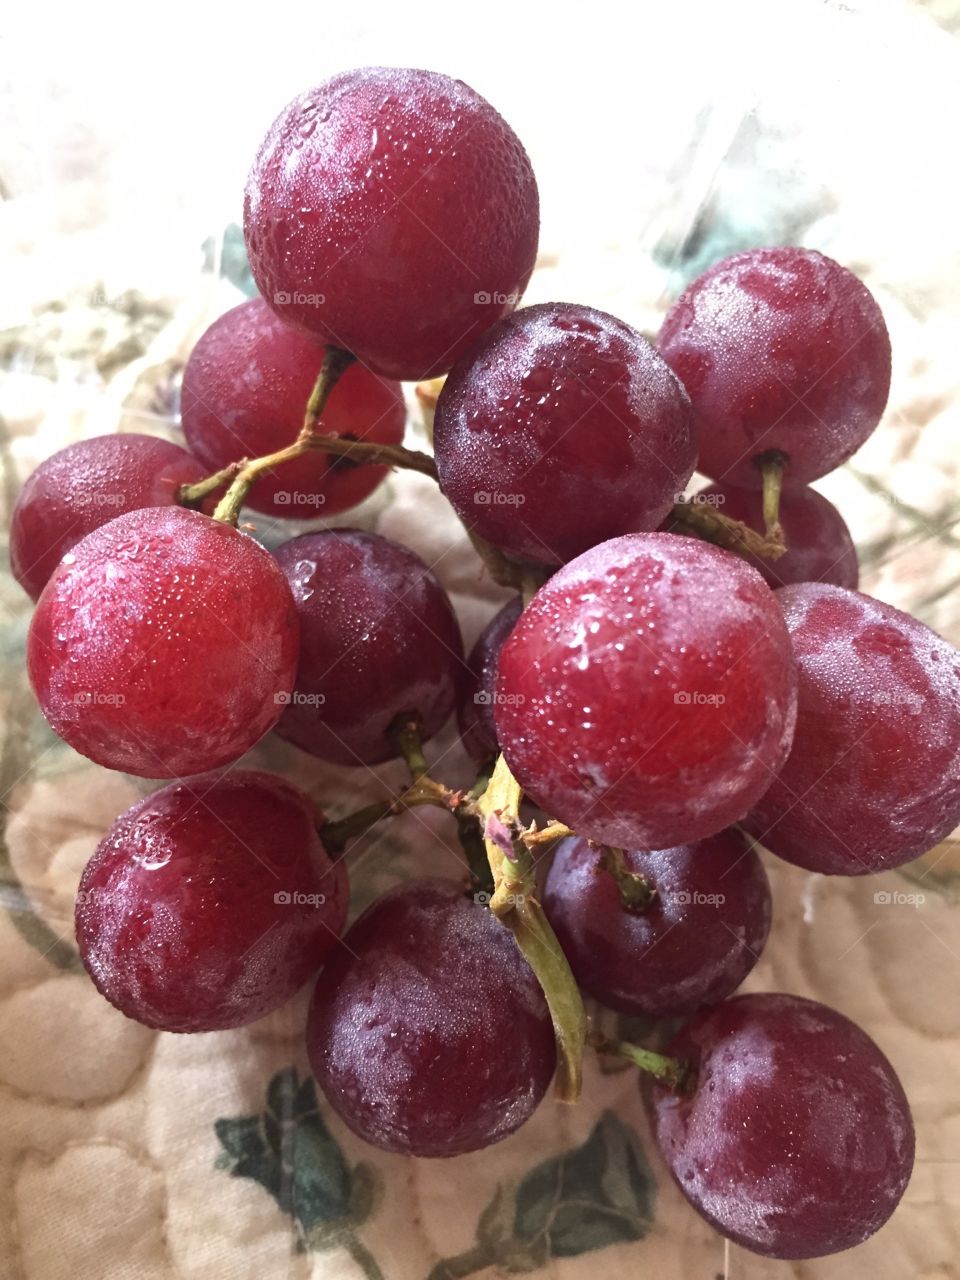 Missouri Wine country Grapes. Took this photo with my IPhone 6 the morning of my sisters wedding, in the Missouri wine country. It was breakfast! 